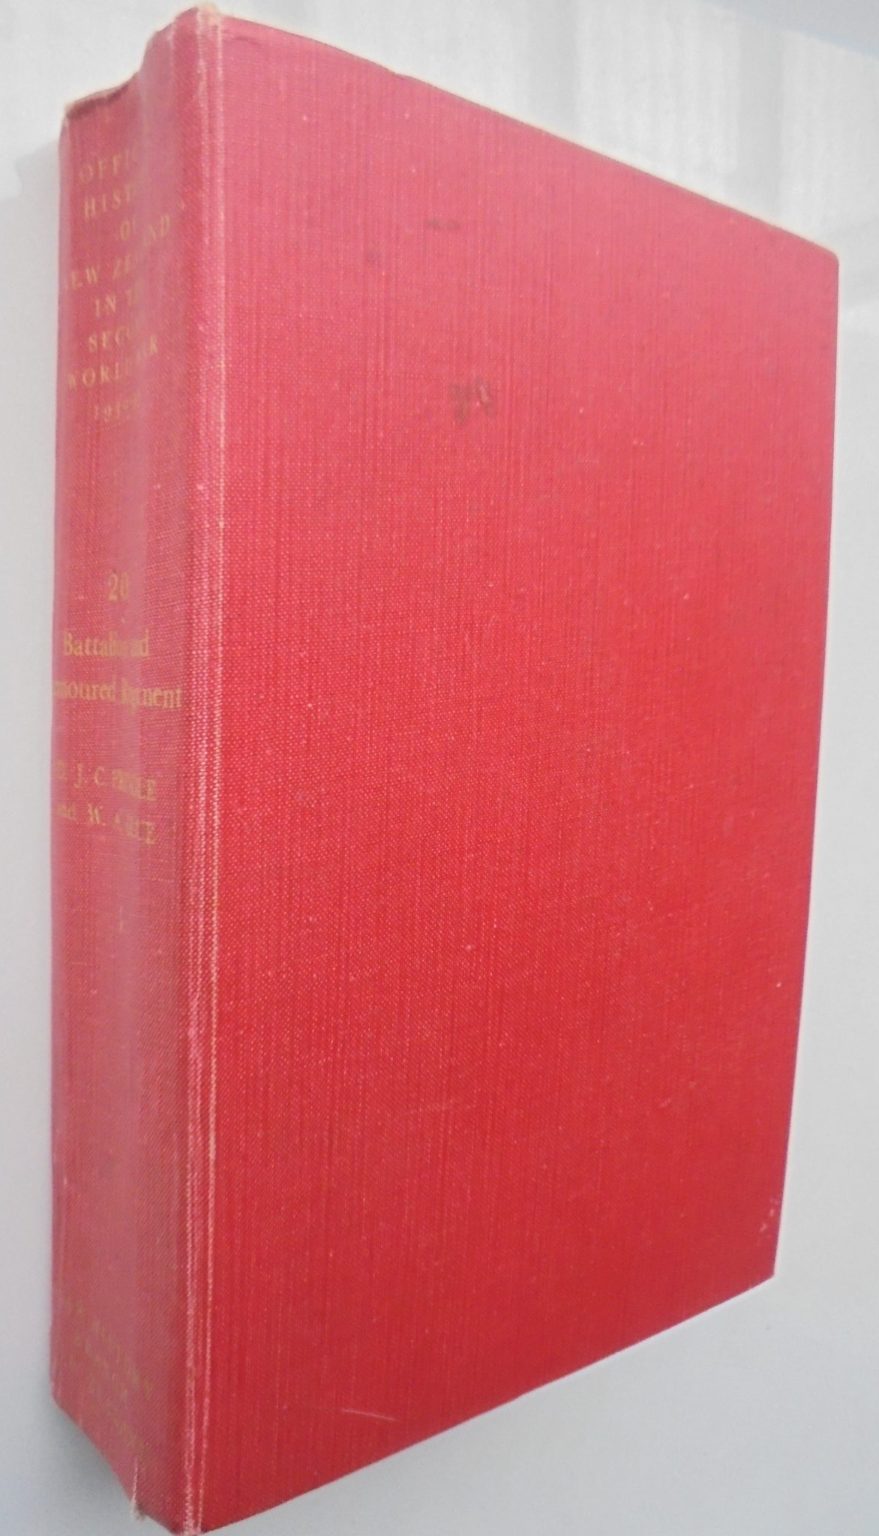 20 Battalion and Armoured Regiment. Official History of New Zealand in the Second World War 1939- 45 by D.J.C. Pringle and W.A. Glue.